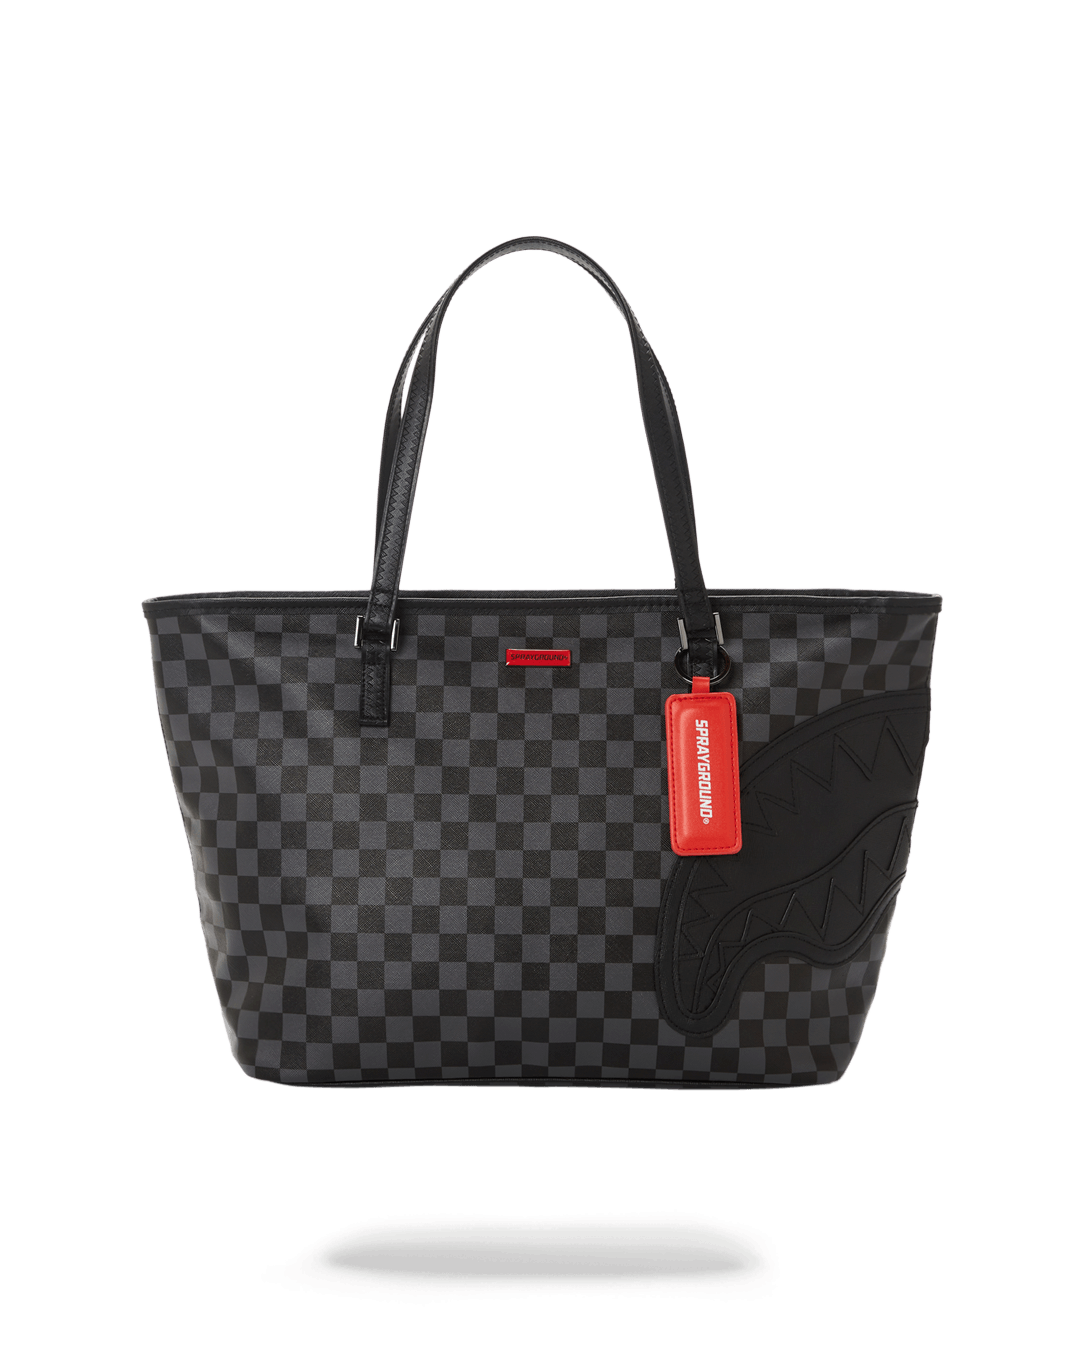 HENNY BLACK TOTE - HIGH QUALITY AND INEXPENSIVE - HENNY BLACK TOTE HIGH QUALITY AND INEXPENSIVE-31